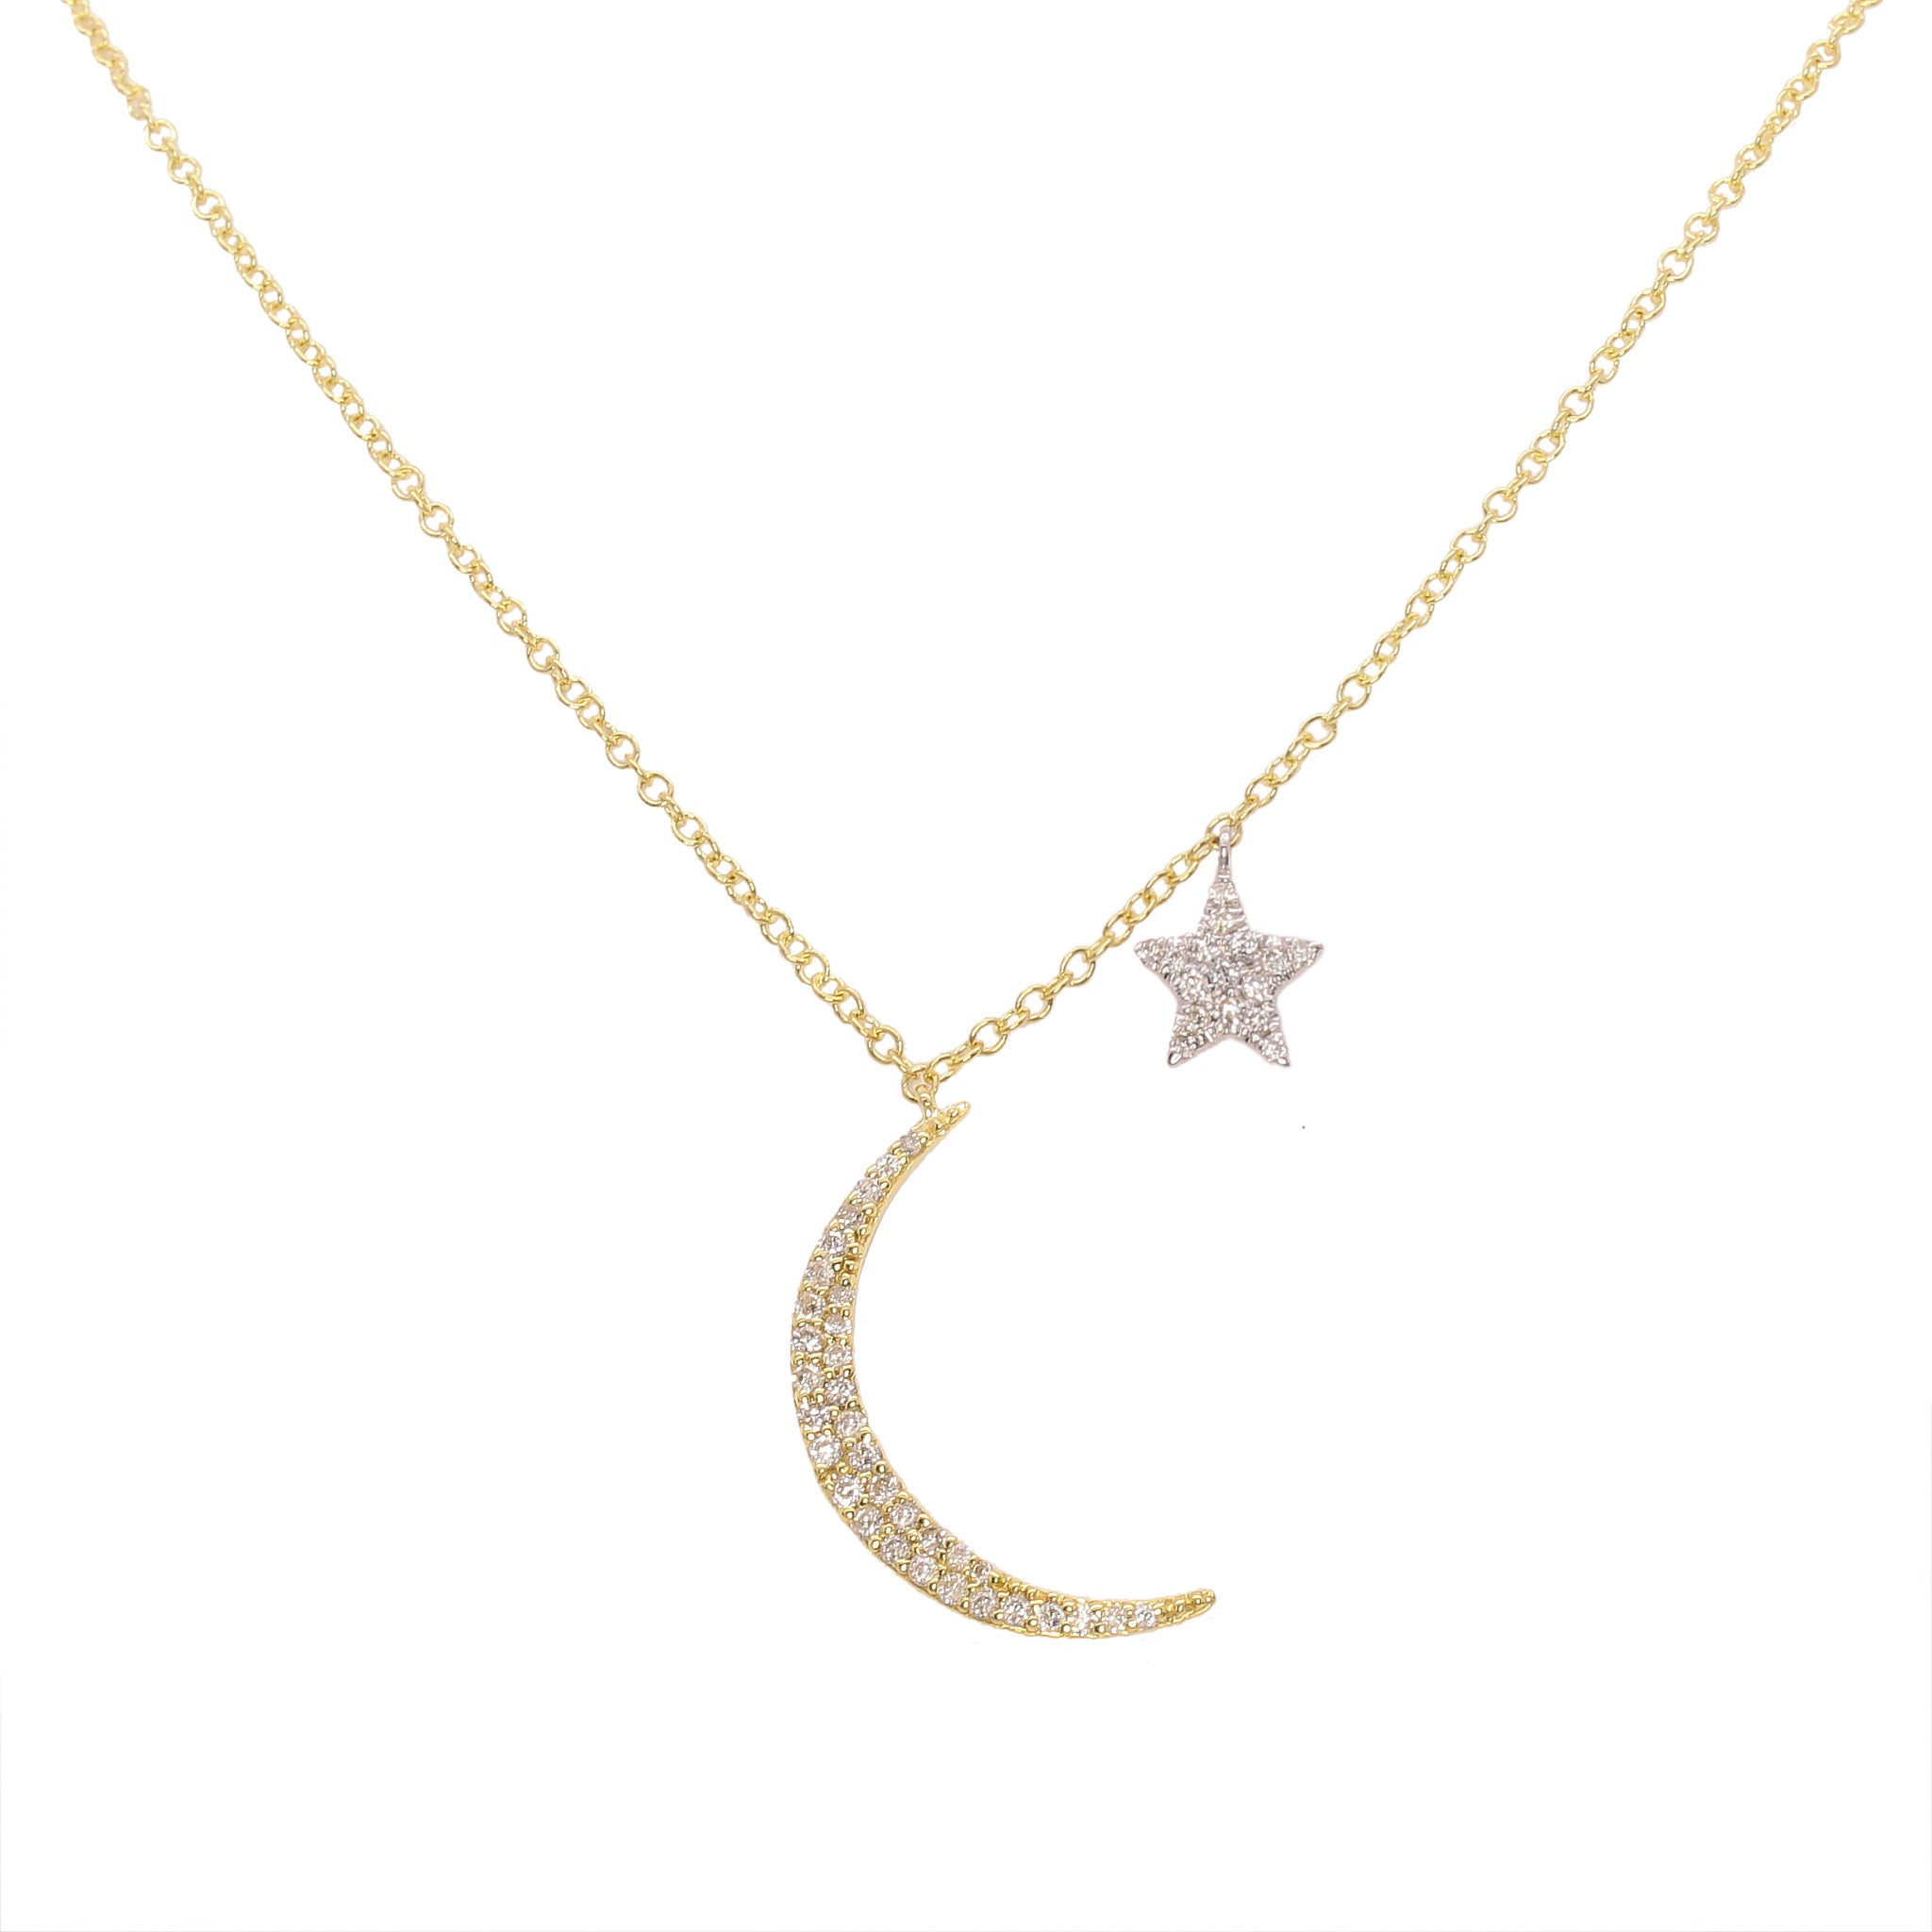 Meira T 14k Yellow Gold Moon and Star Necklace